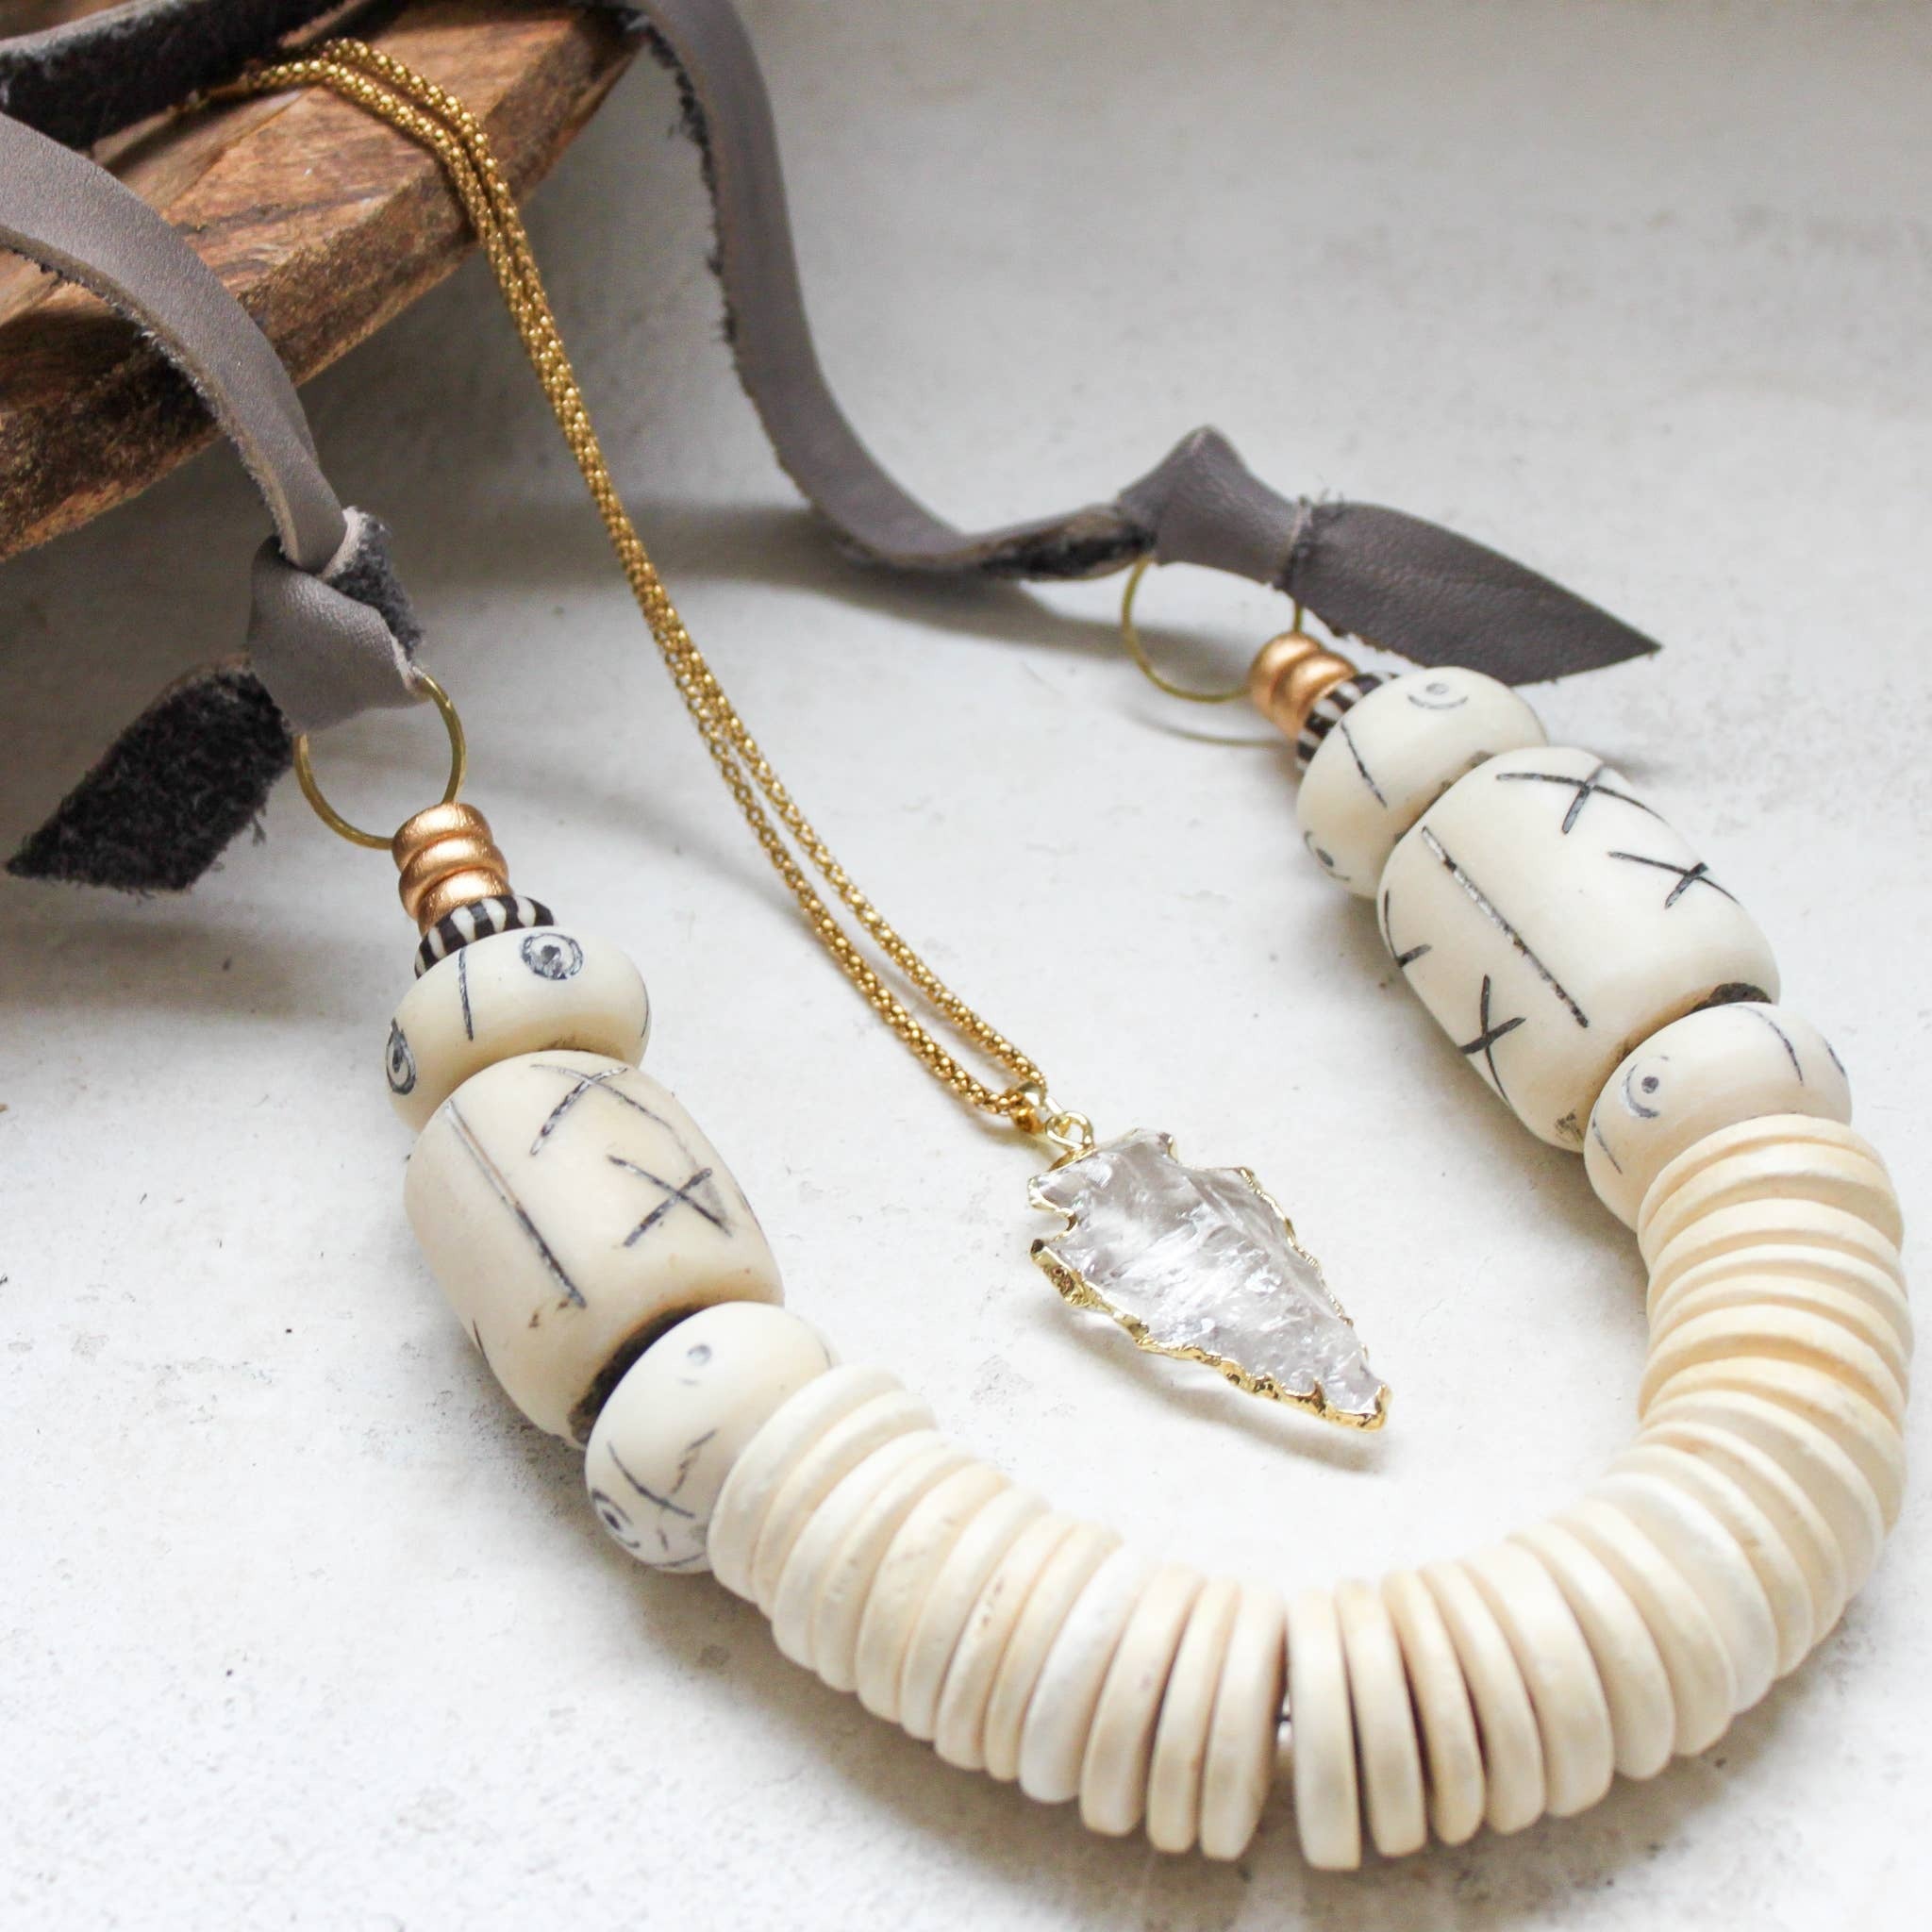 Petrified Whale Bone beads, oxidized sterling silver beads Necklace